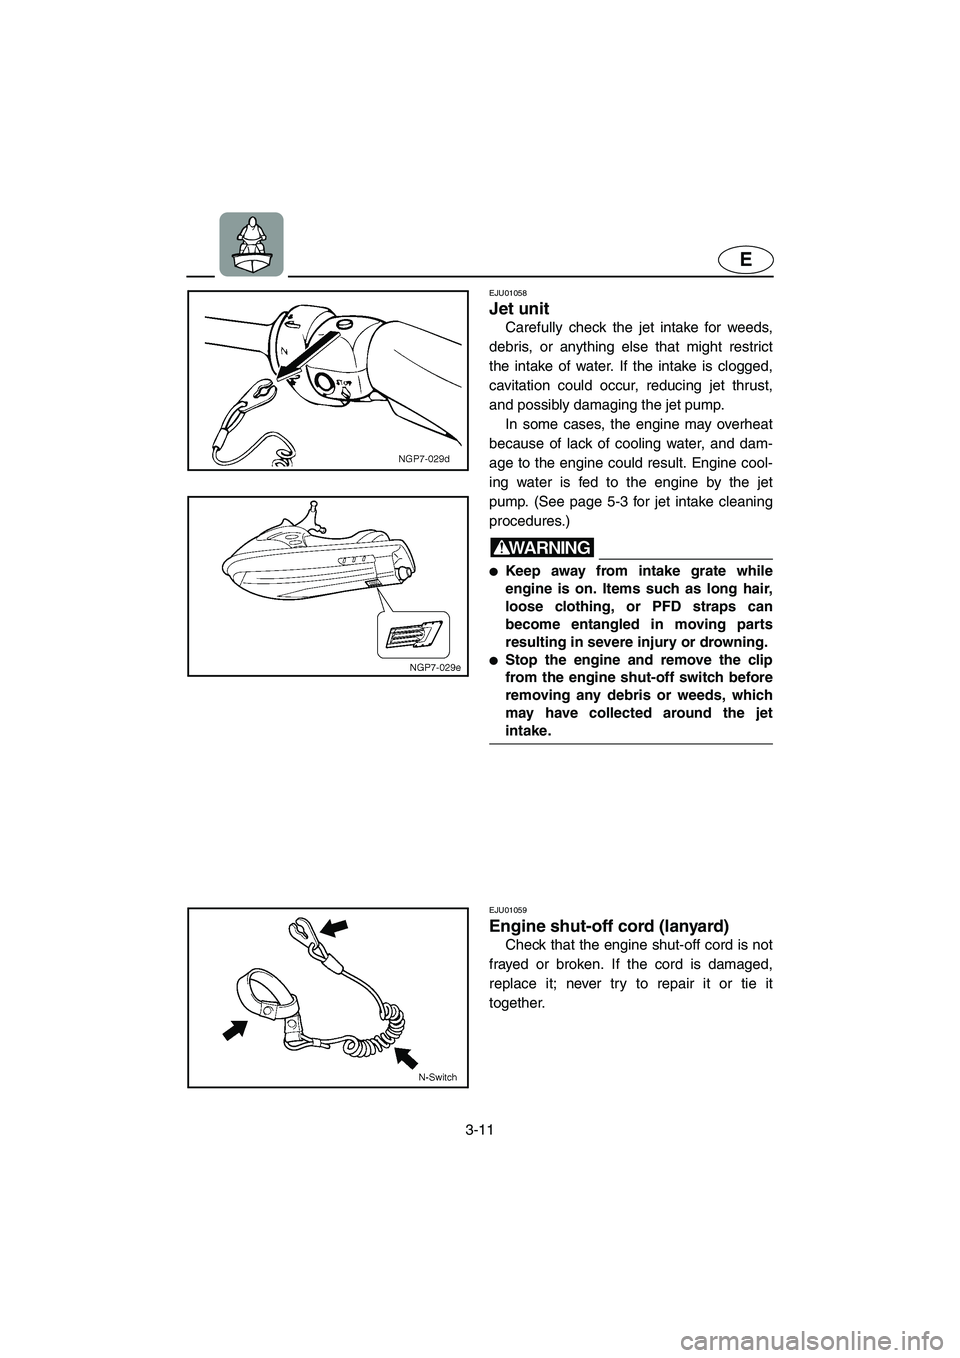 YAMAHA SUPERJET 2002  Owners Manual 3-11
E
EJU01058 
Jet unit  
Carefully check the jet intake for weeds,
debris, or anything else that might restrict
the intake of water. If the intake is clogged,
cavitation could occur, reducing jet t